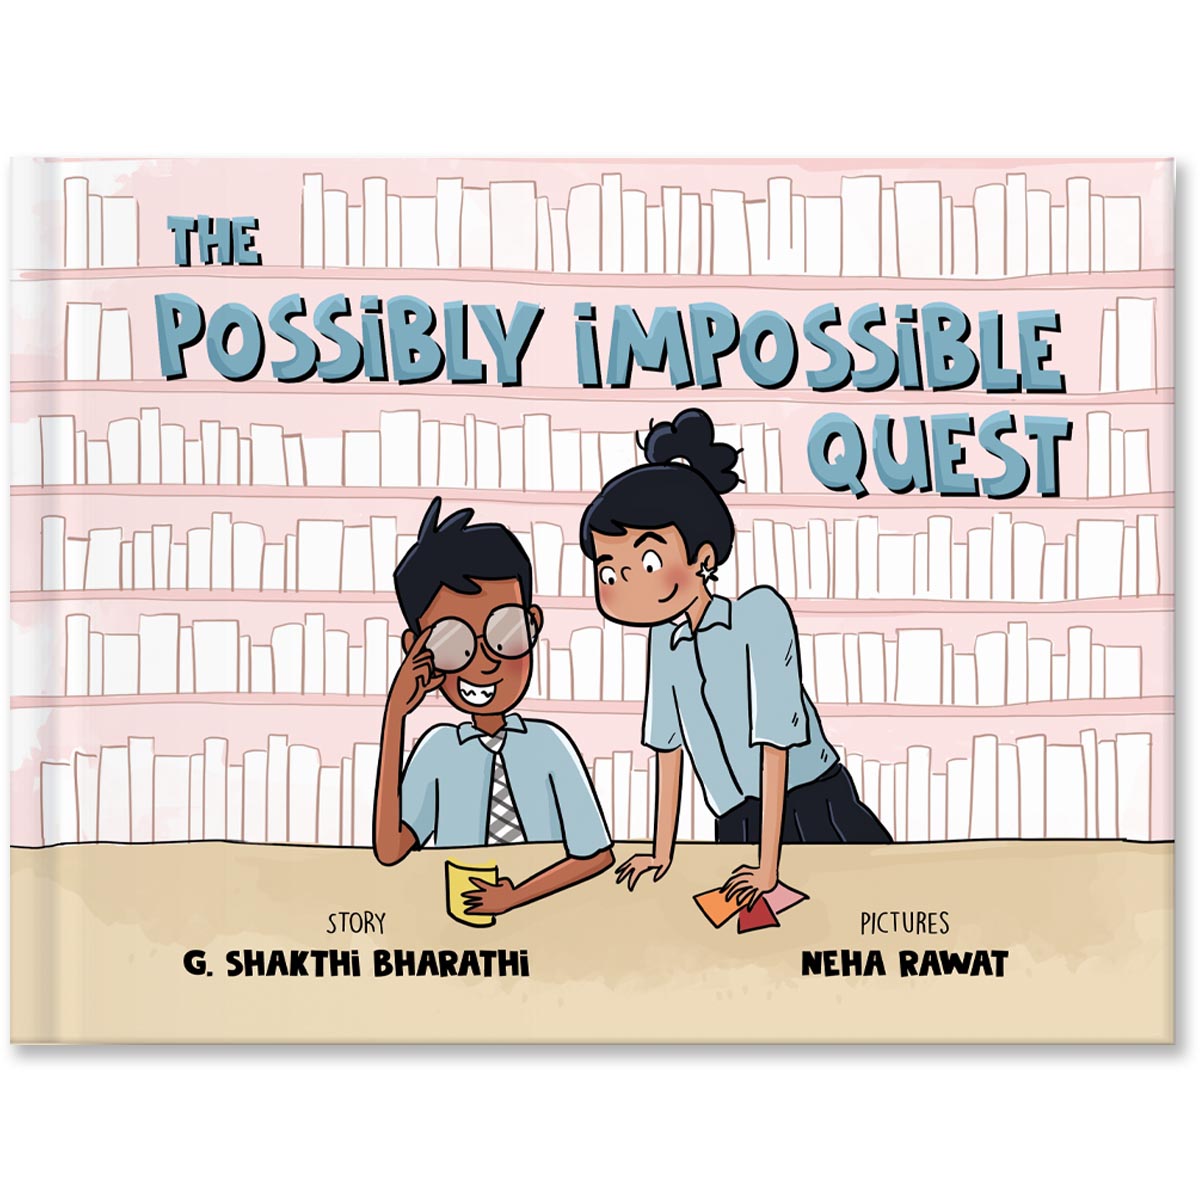 _The Possibly Impossible Quest_Ms Moochie Books_Neha Rawat